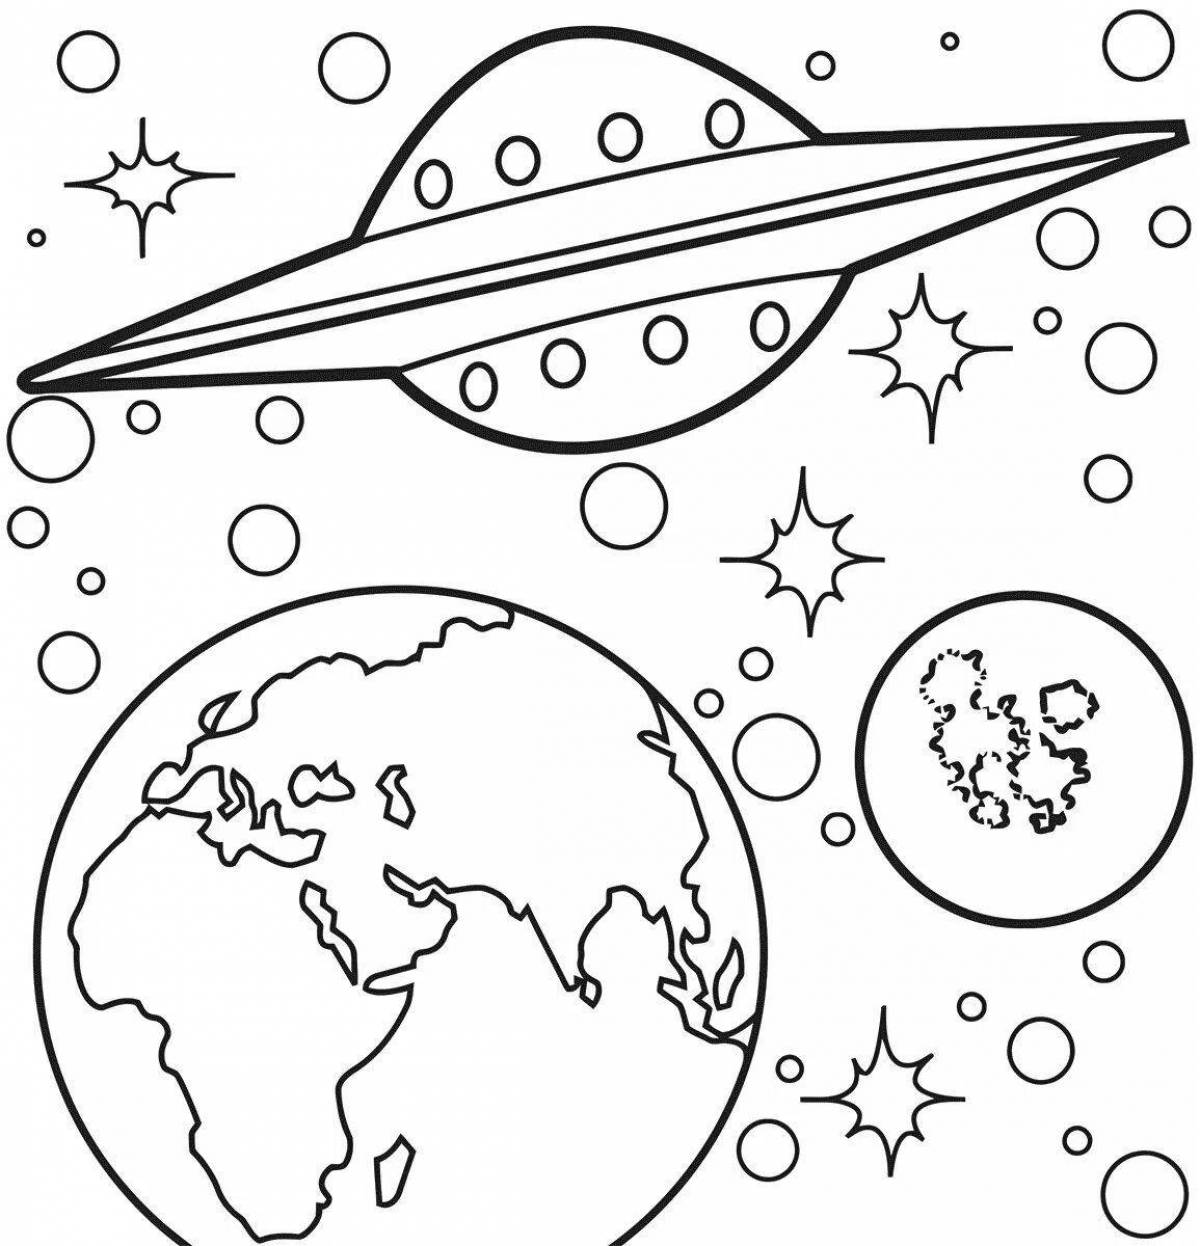 Creative space coloring book for 3-4 year olds